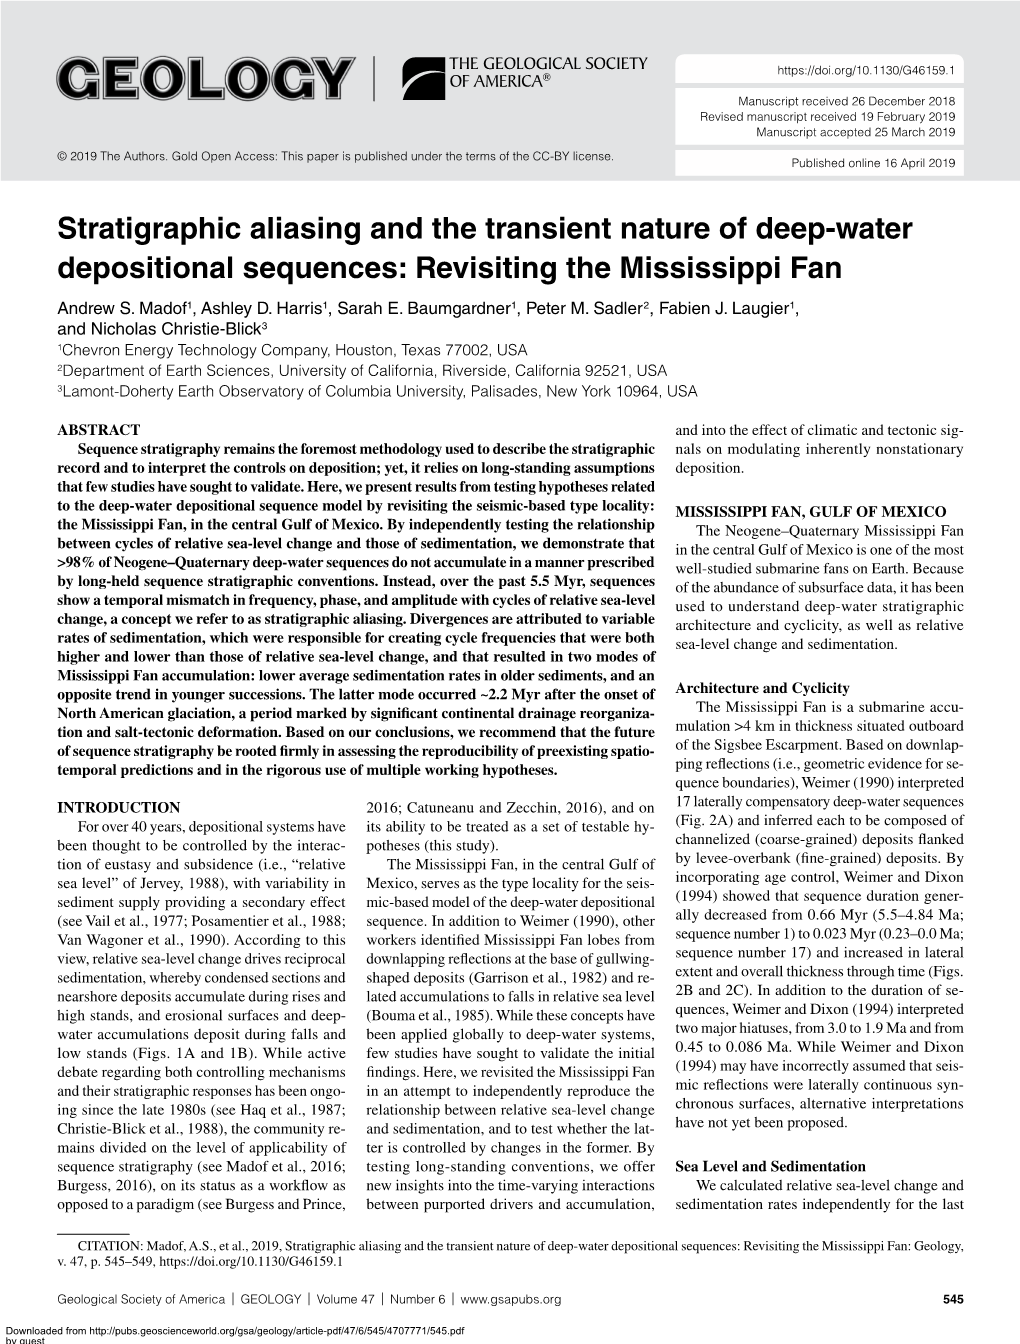 Stratigraphic Aliasing and the Transient Nature of Deep-Water Depositional Sequences: Revisiting the Mississippi Fan Andrew S